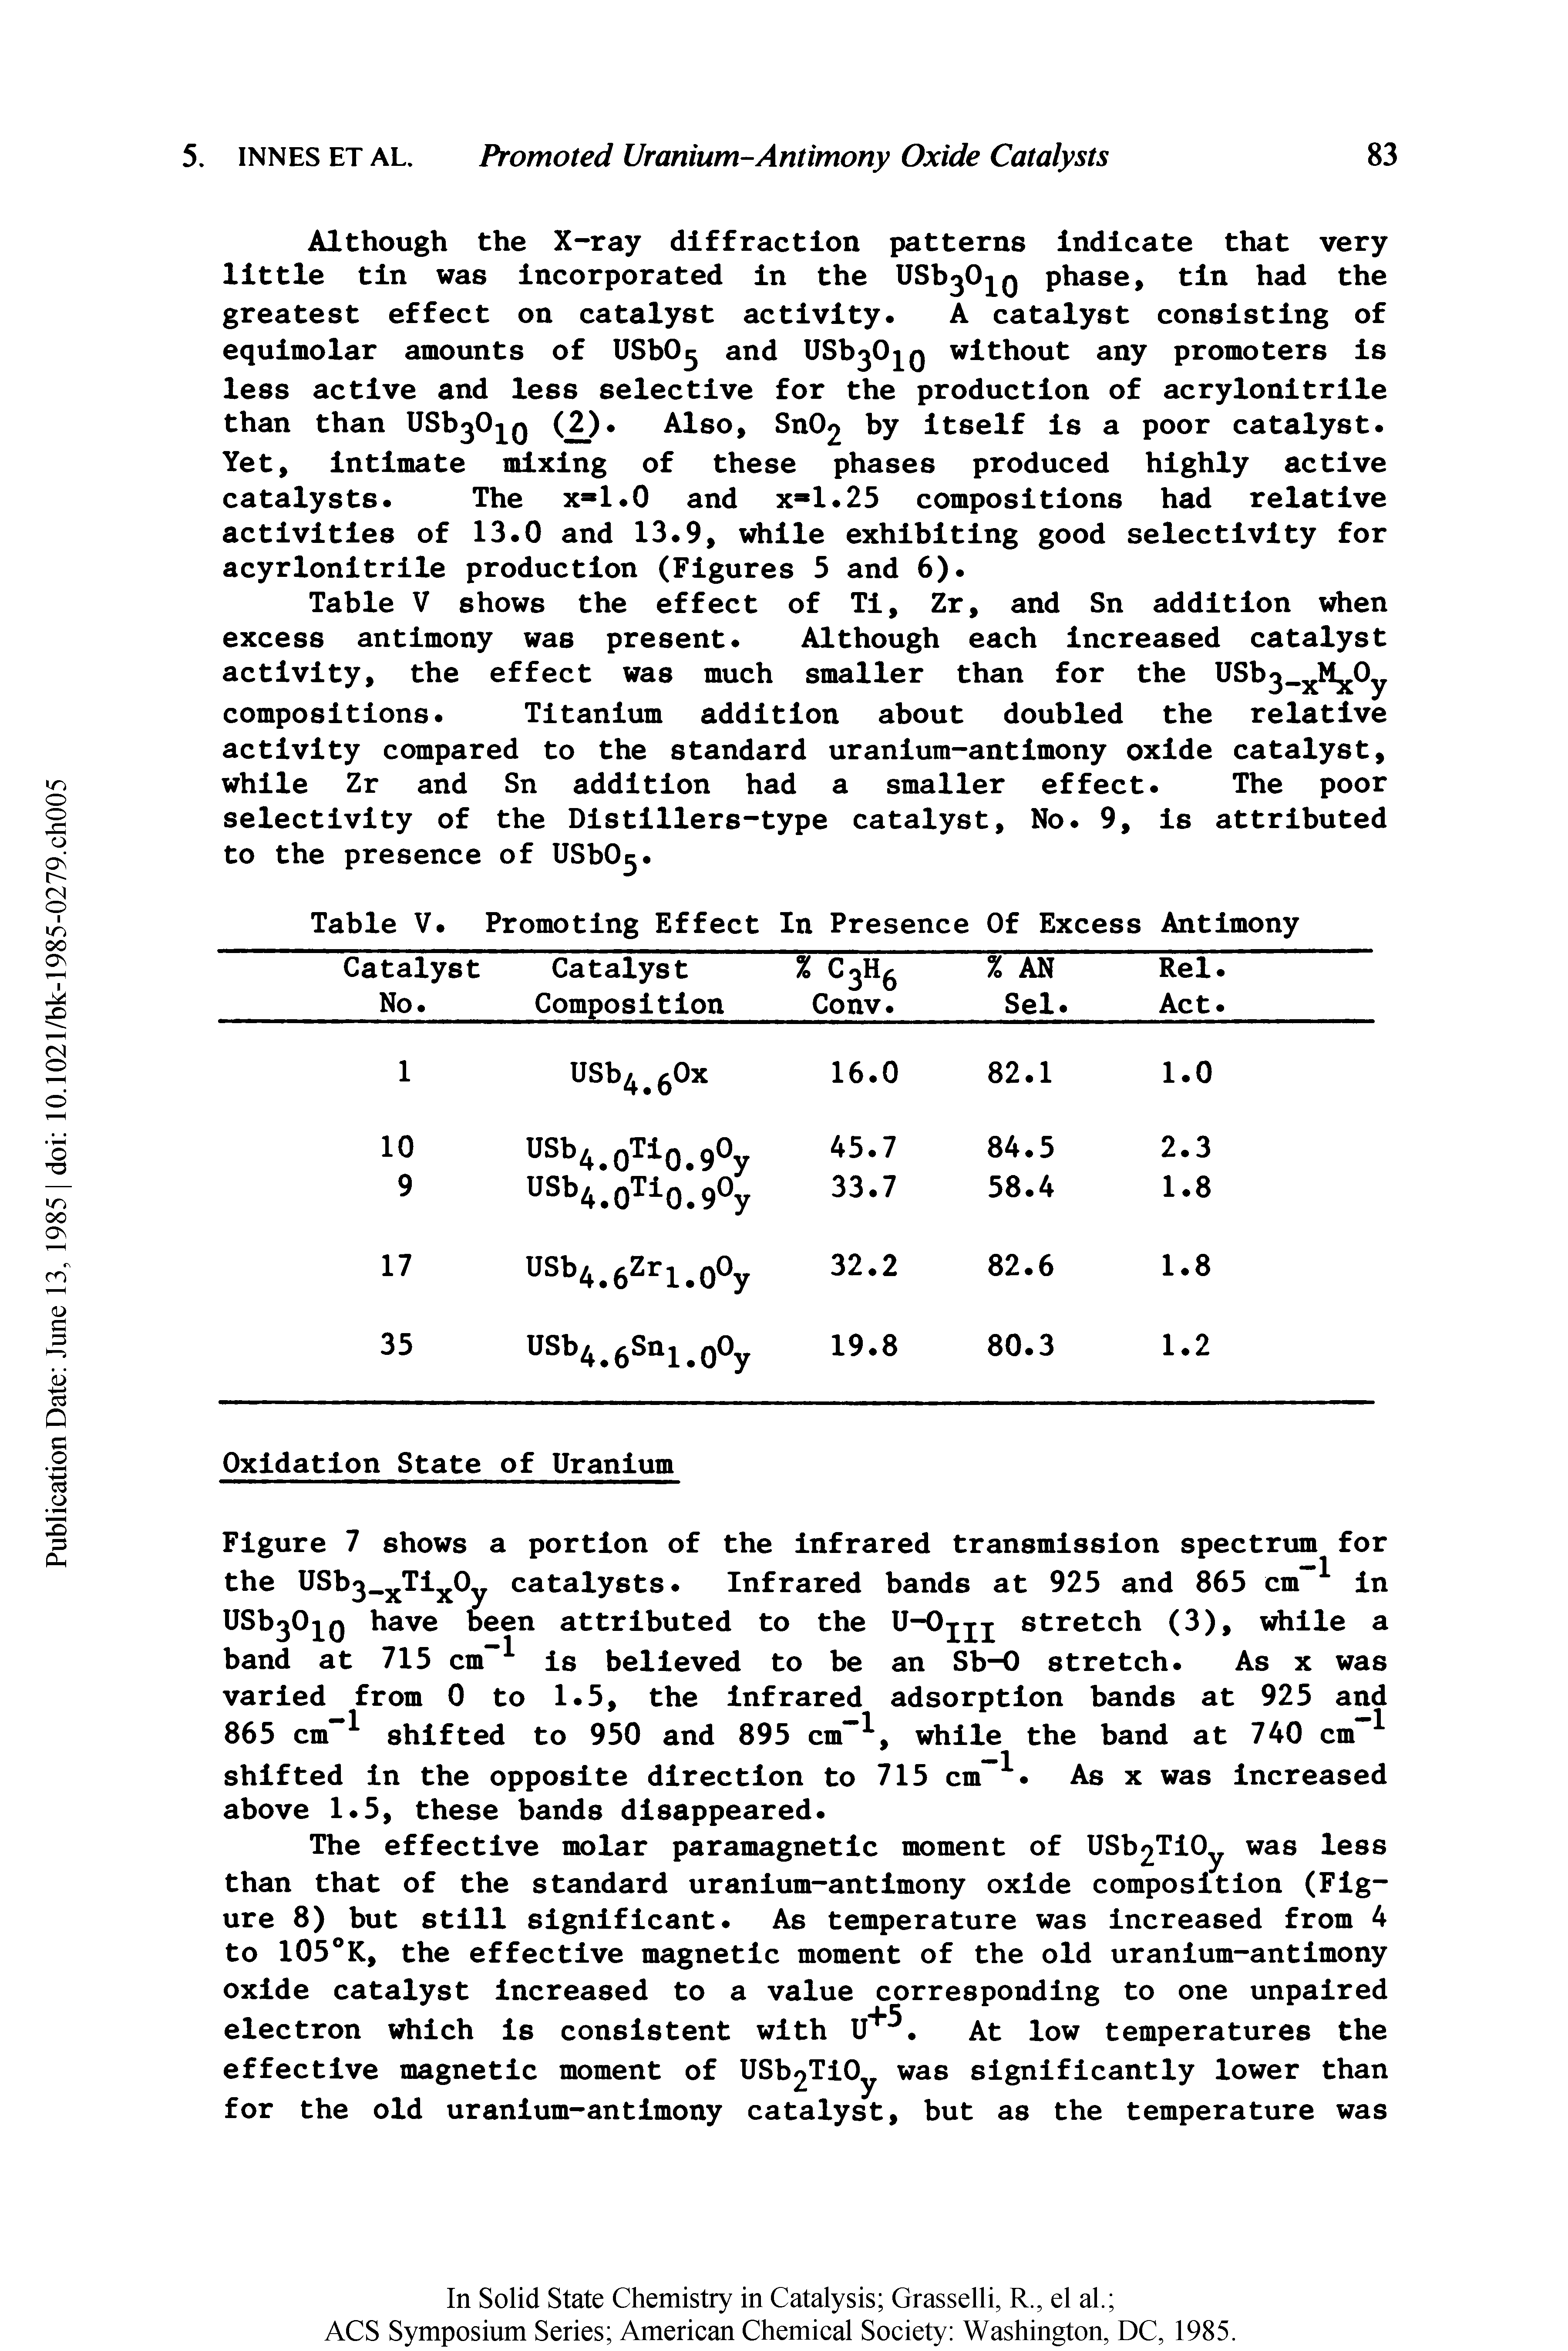 Table V shows the effect of Ti, Zr, and Sn addition when excess antimony was present. Although each Increased catalyst activity, the effect was much smaller than for the USb. M Oy compositions. Titanium addition about doubled the relative activity compared to the standard uranium-antimony oxide catalyst, while Zr and Sn addition had a smaller effect. The poor selectivity of the Distillers-type catalyst. No. 9, is attributed to the presence of USbO. ...